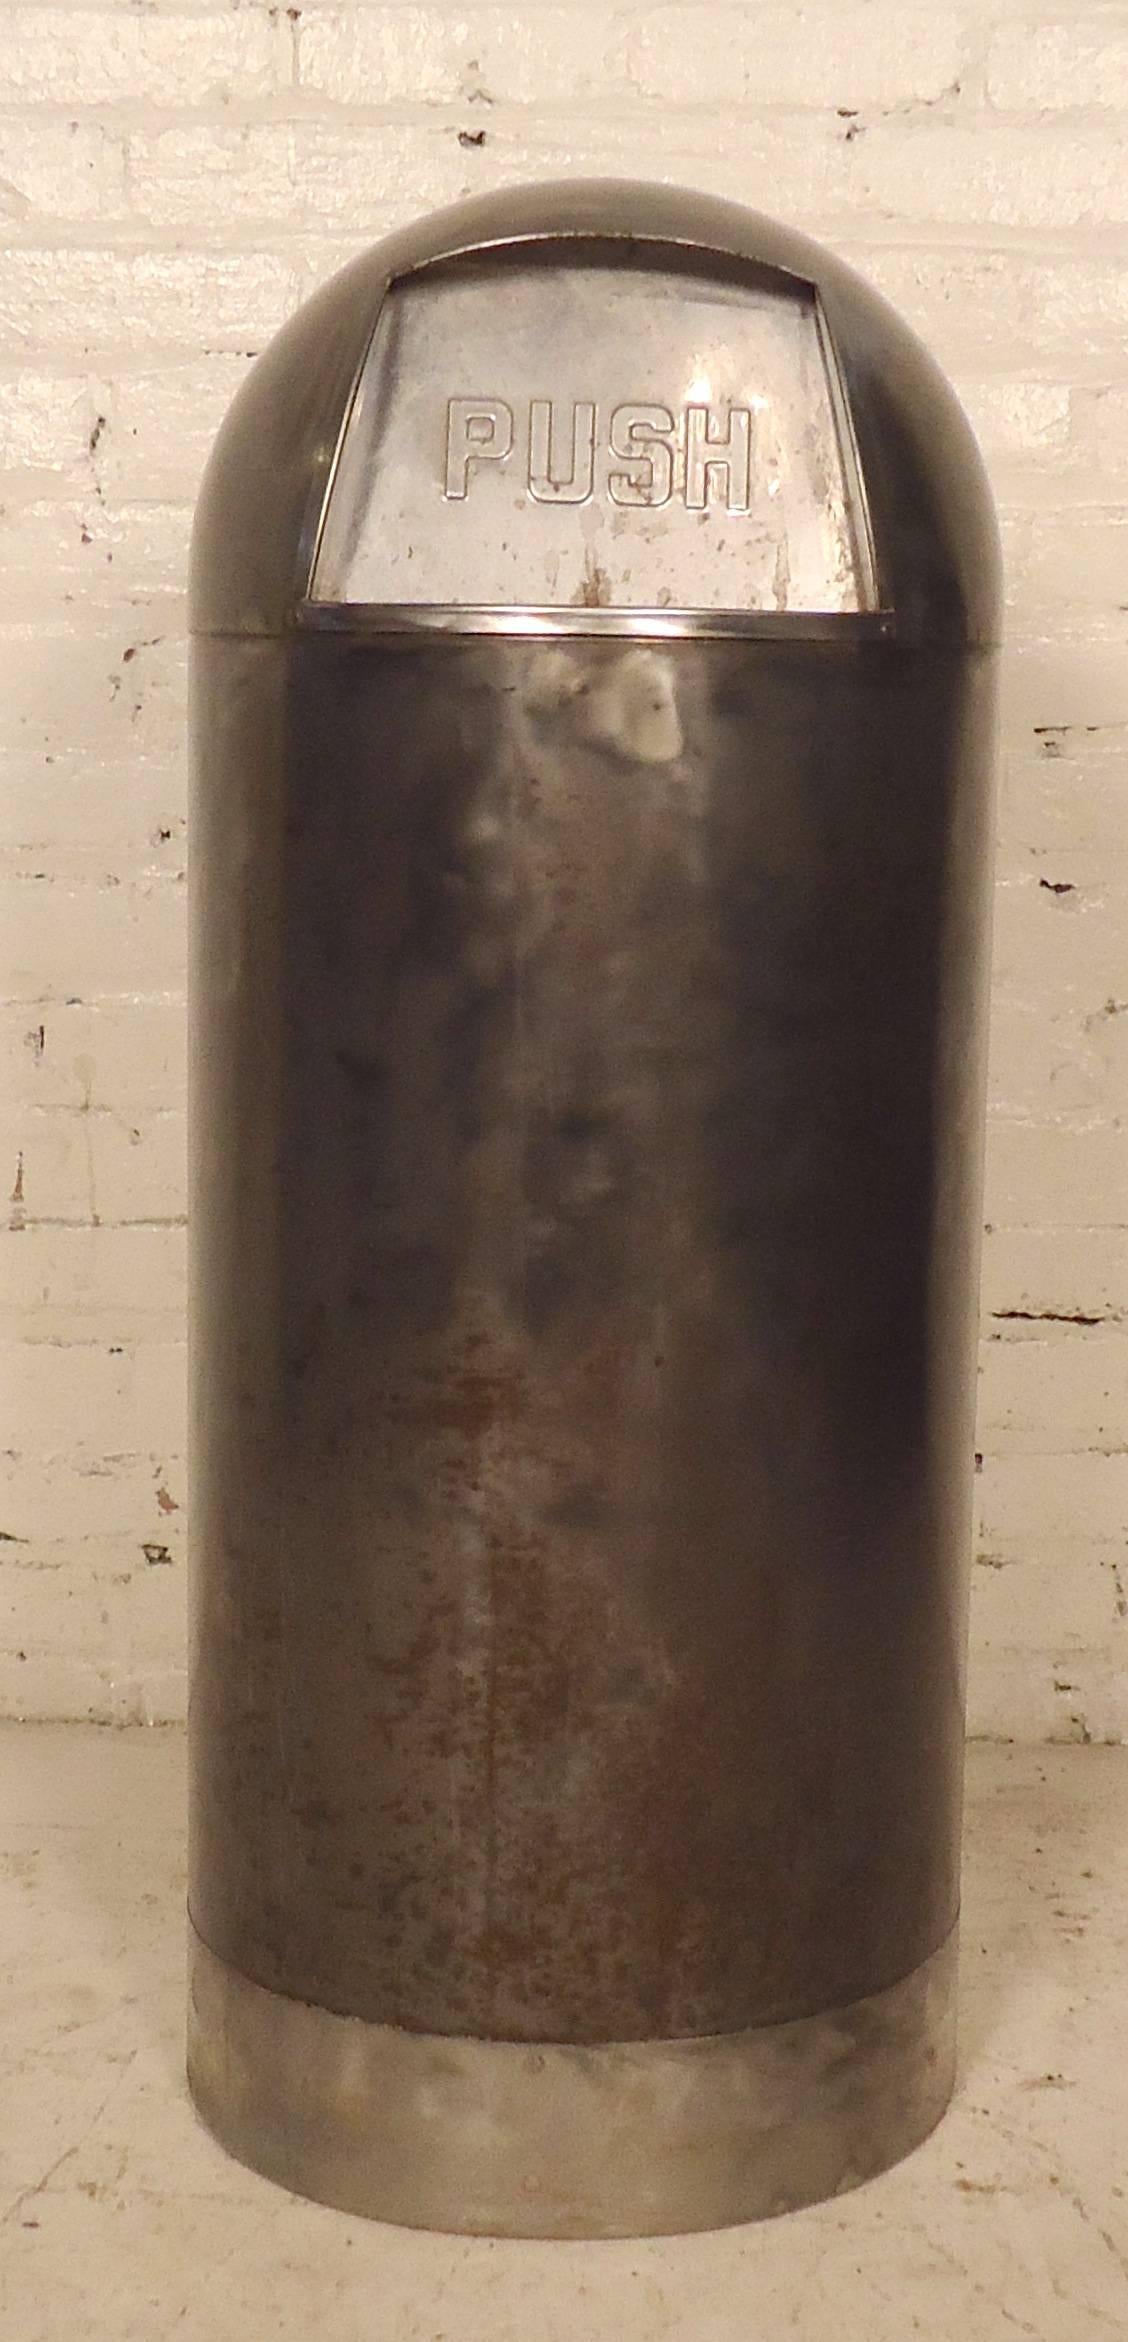 Metal trash can with dome top and "push" embossed on the lid. Comes with galvanized liner. Paint has been stripped and metal has been sanded and lacquered to give a bare metal style finish.

(Please confirm item location - NY or NJ -